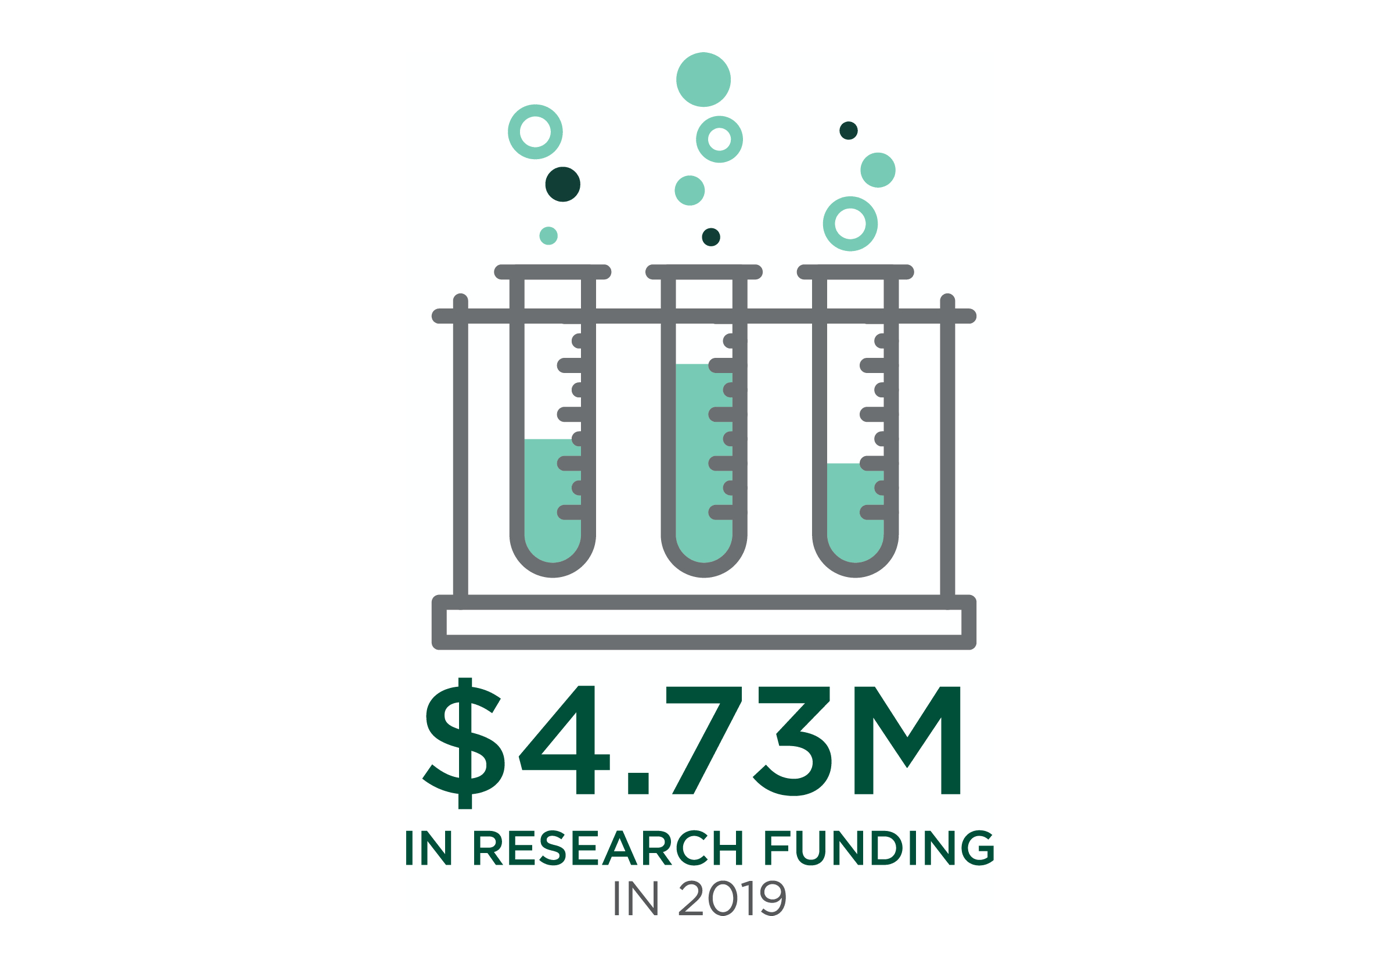 $4.73M in research funding in 2019